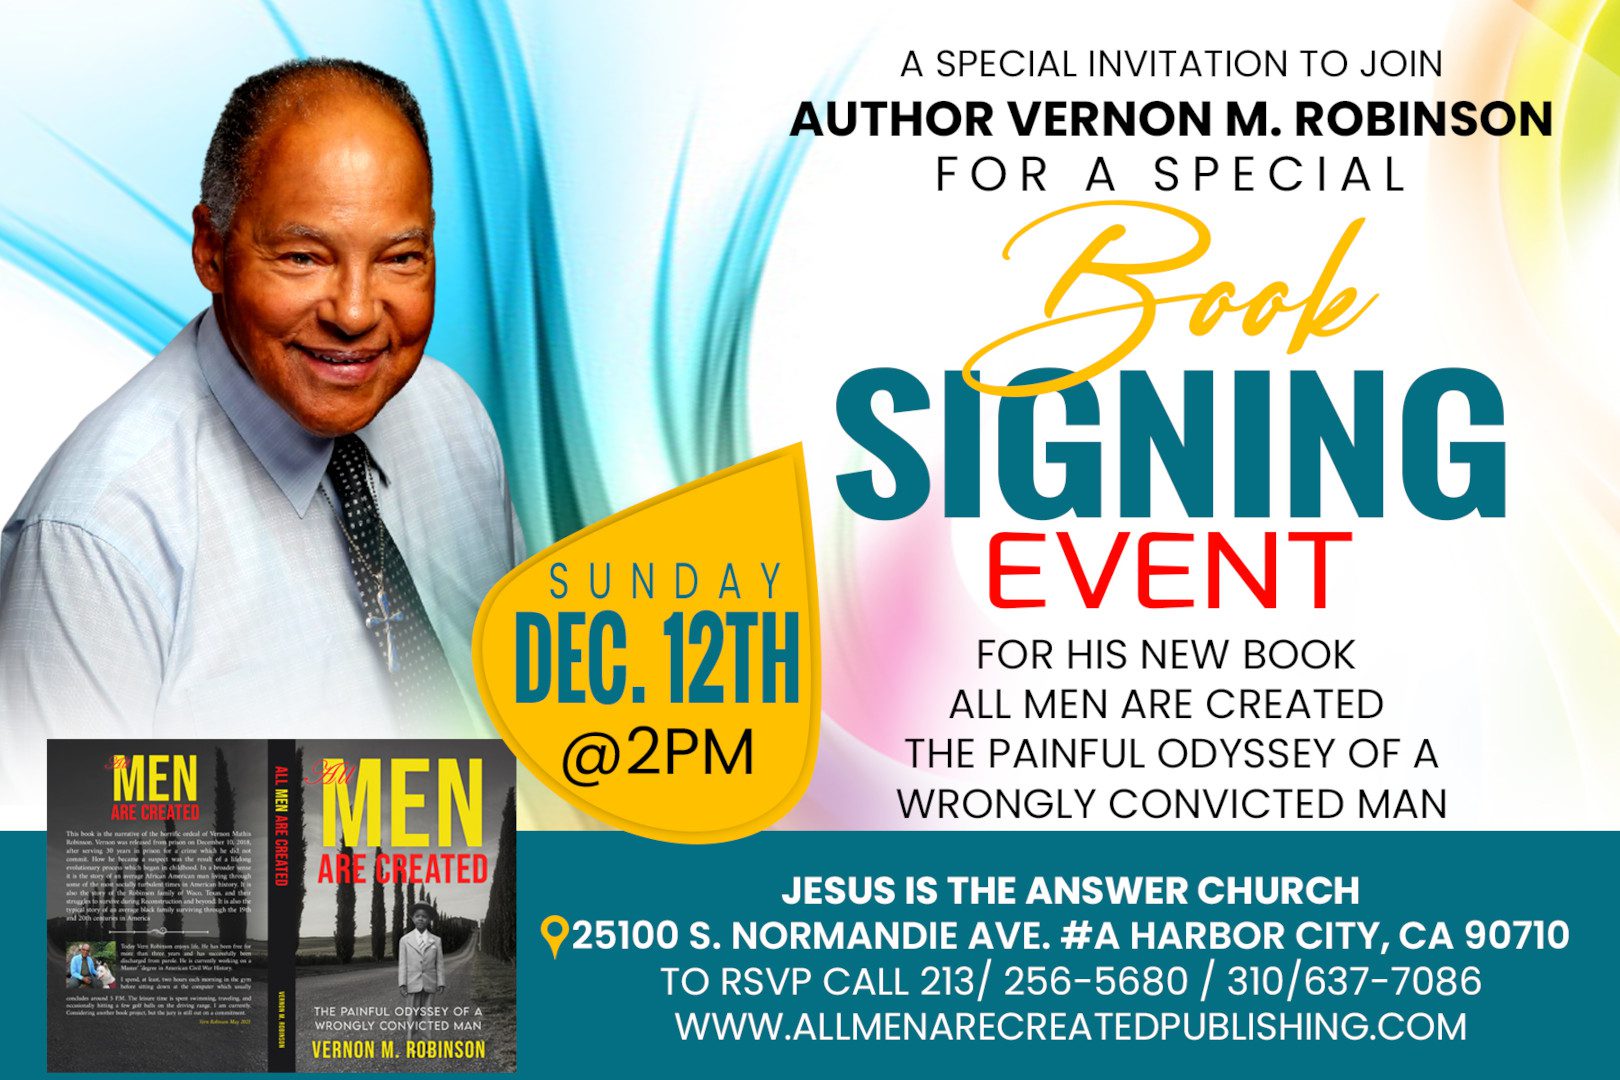 A special book signing event for vernon m. Robinson